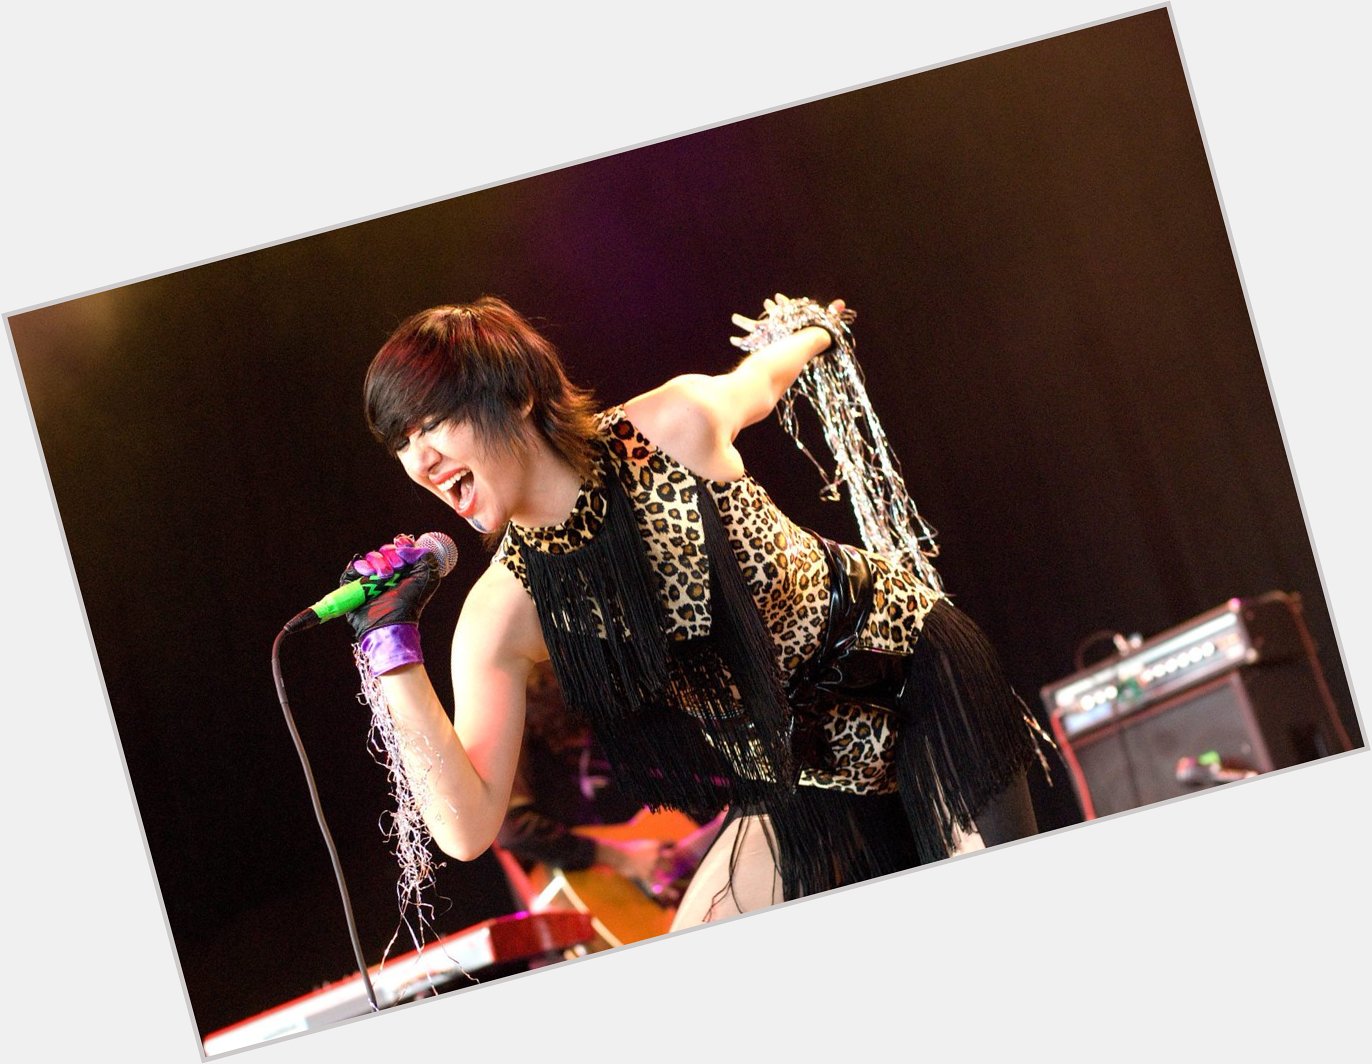 Happy birthday wishes today to Yeah Yeah Yeahs frontwoman Karen O Orzolek! 